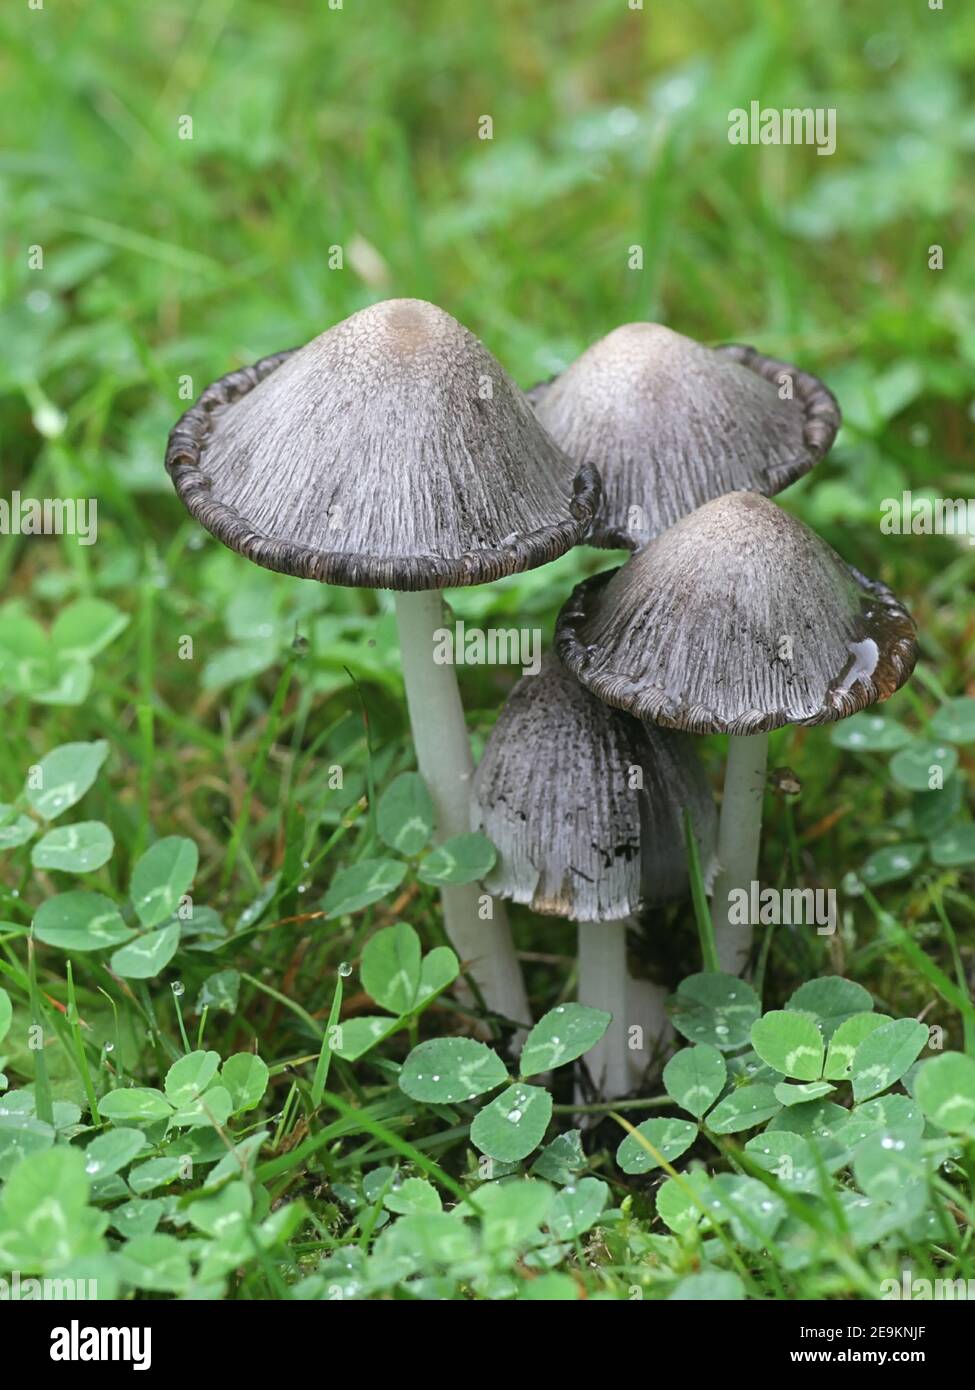 Coprinopsis atramentaria, known as the common ink cap, common inky cap or tippler's bane, wild mushroom from Finland Stock Photo